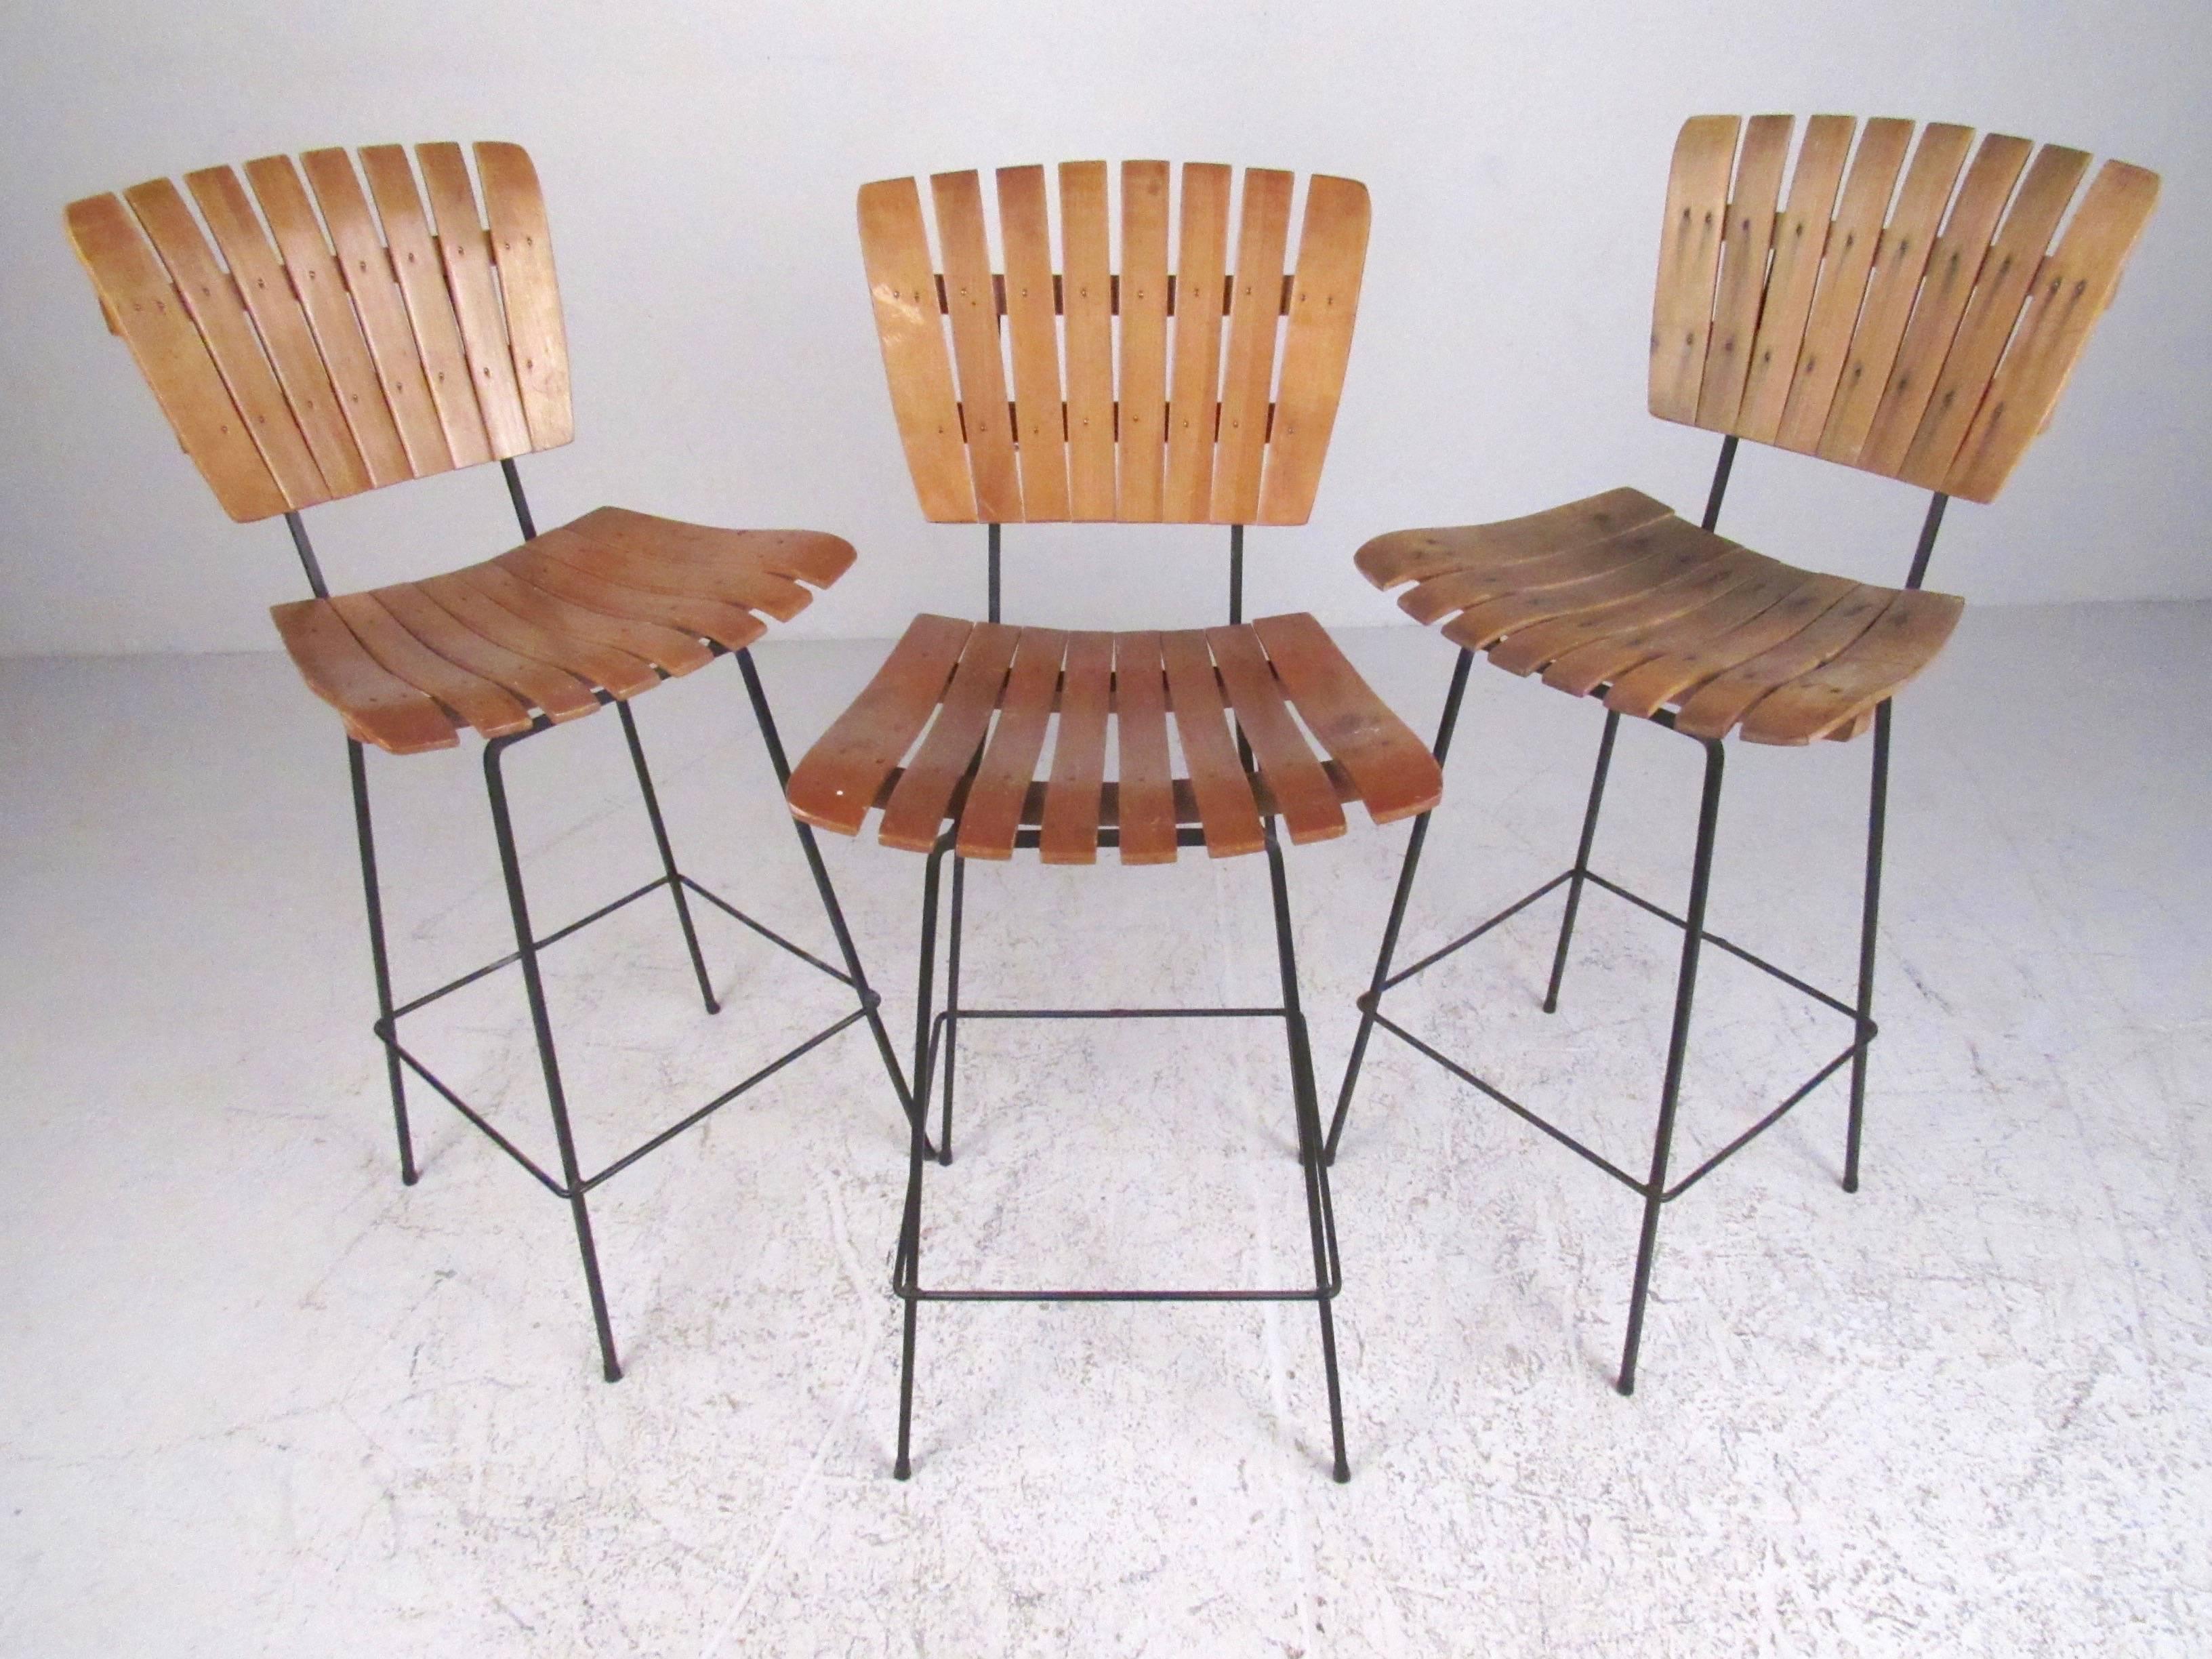 This set of three vintage modern slat style bar stools feature Arthur Umanoff style design, wood slat construction and cast iron metal bases. The sturdy set of three make a memorable mid-century addition to any interior. Please confirm item location